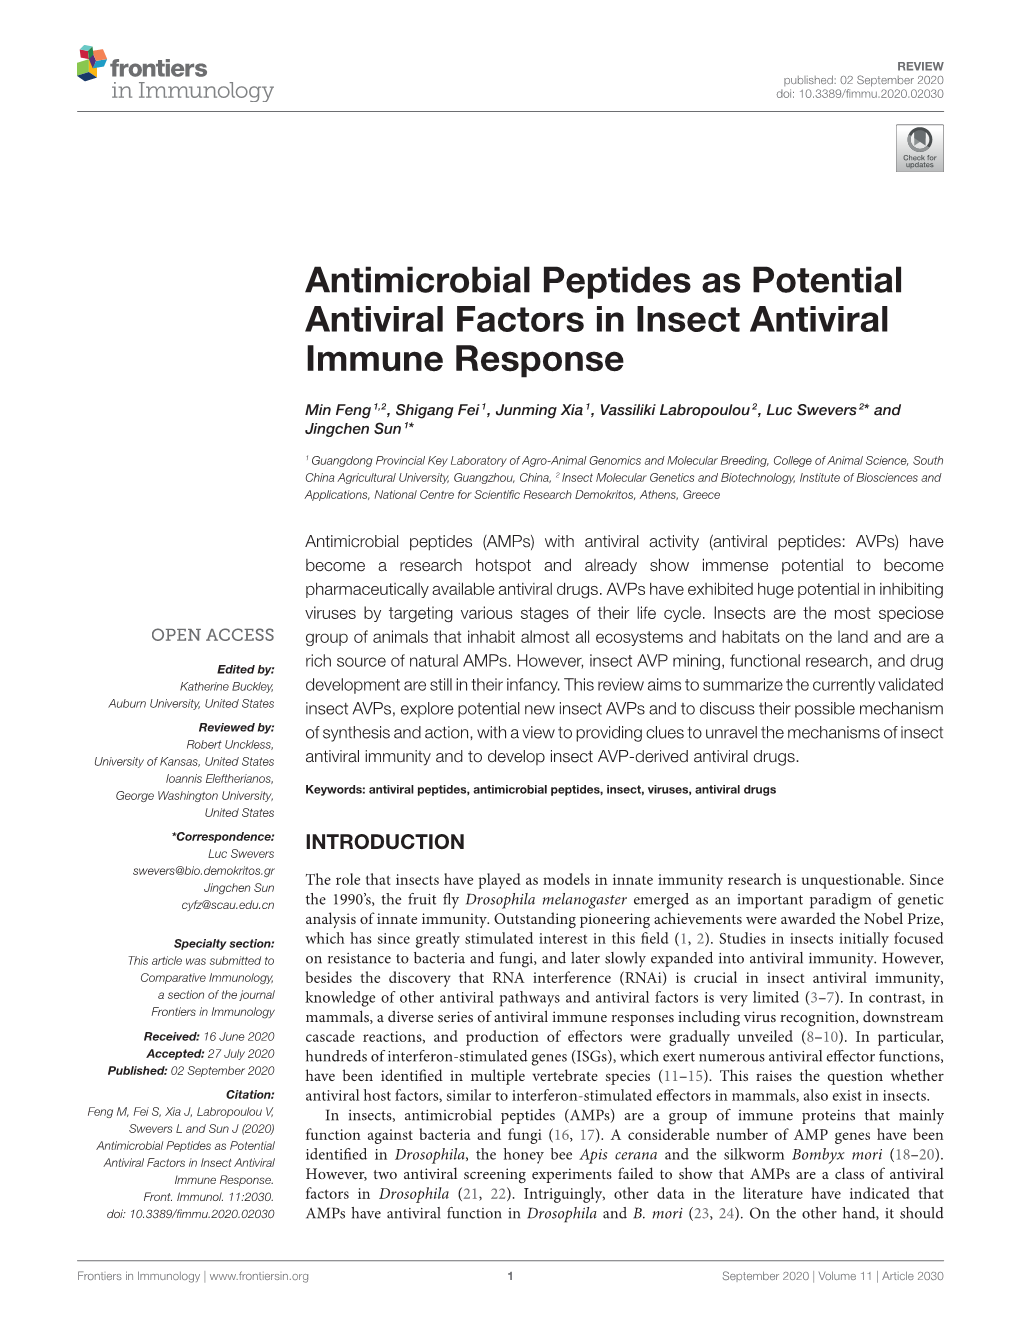 Antimicrobial Peptides As Potential Antiviral Factors in Insect Antiviral Immune Response